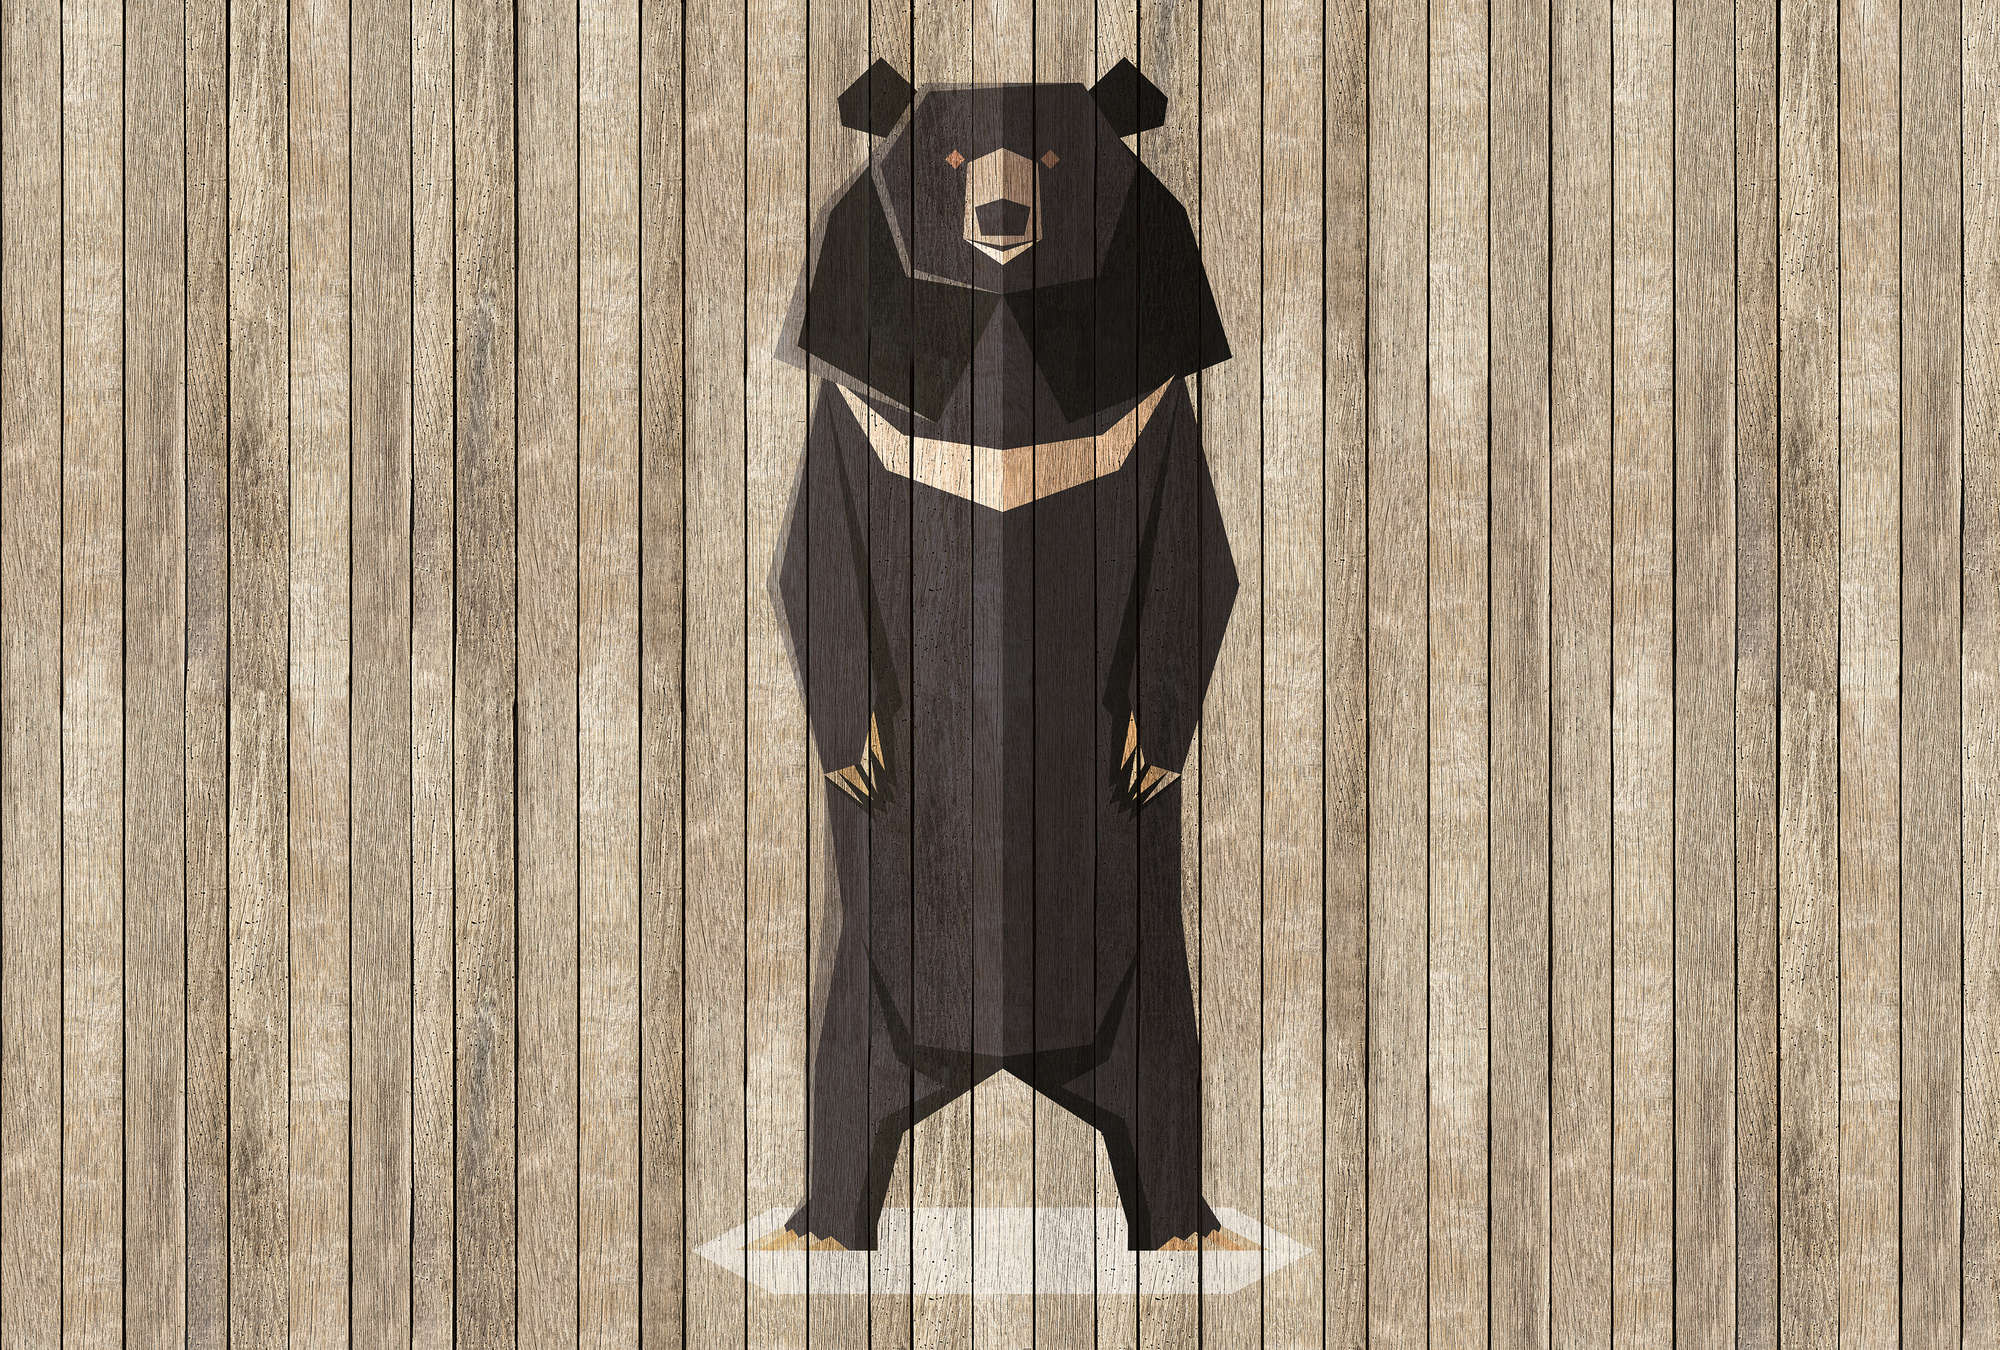             Born to Be Wild 1 - Board Wallpaper with Bears - Wooden Panels Wide - Beige, Brown | Textured Non-woven
        